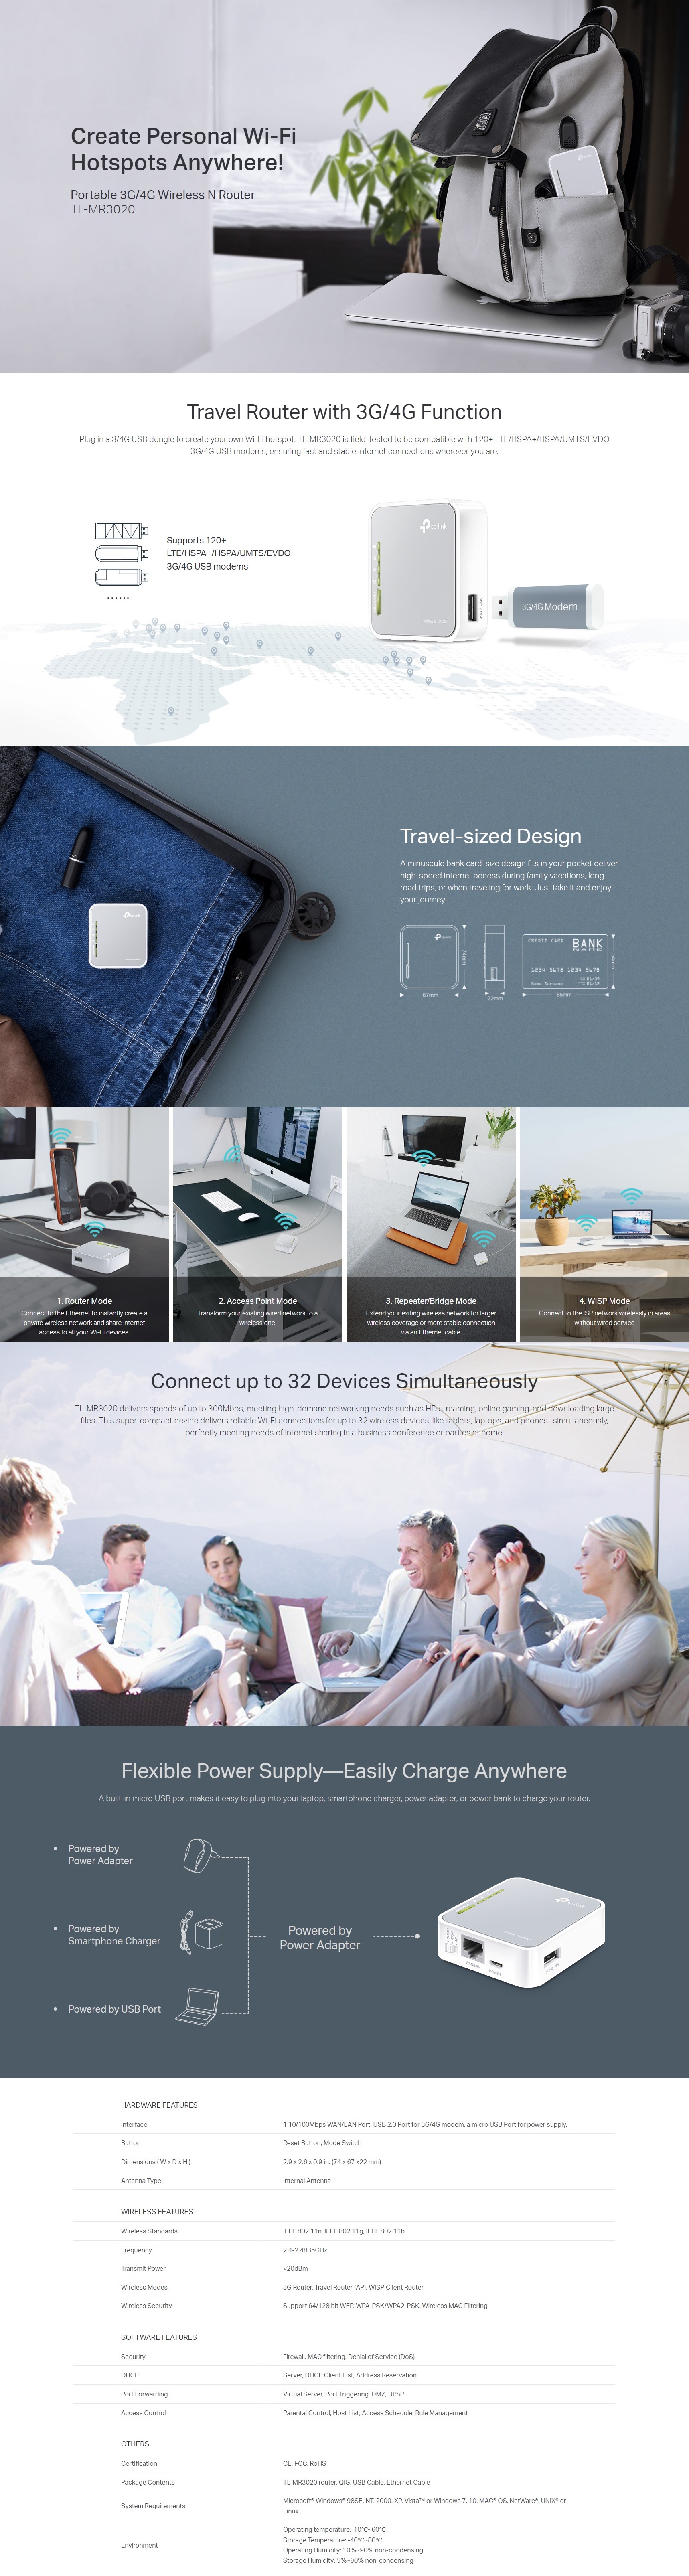 A large marketing image providing additional information about the product TP-Link MR3020 - N150 3G/4G Wi-Fi 4 Portable Router - Additional alt info not provided